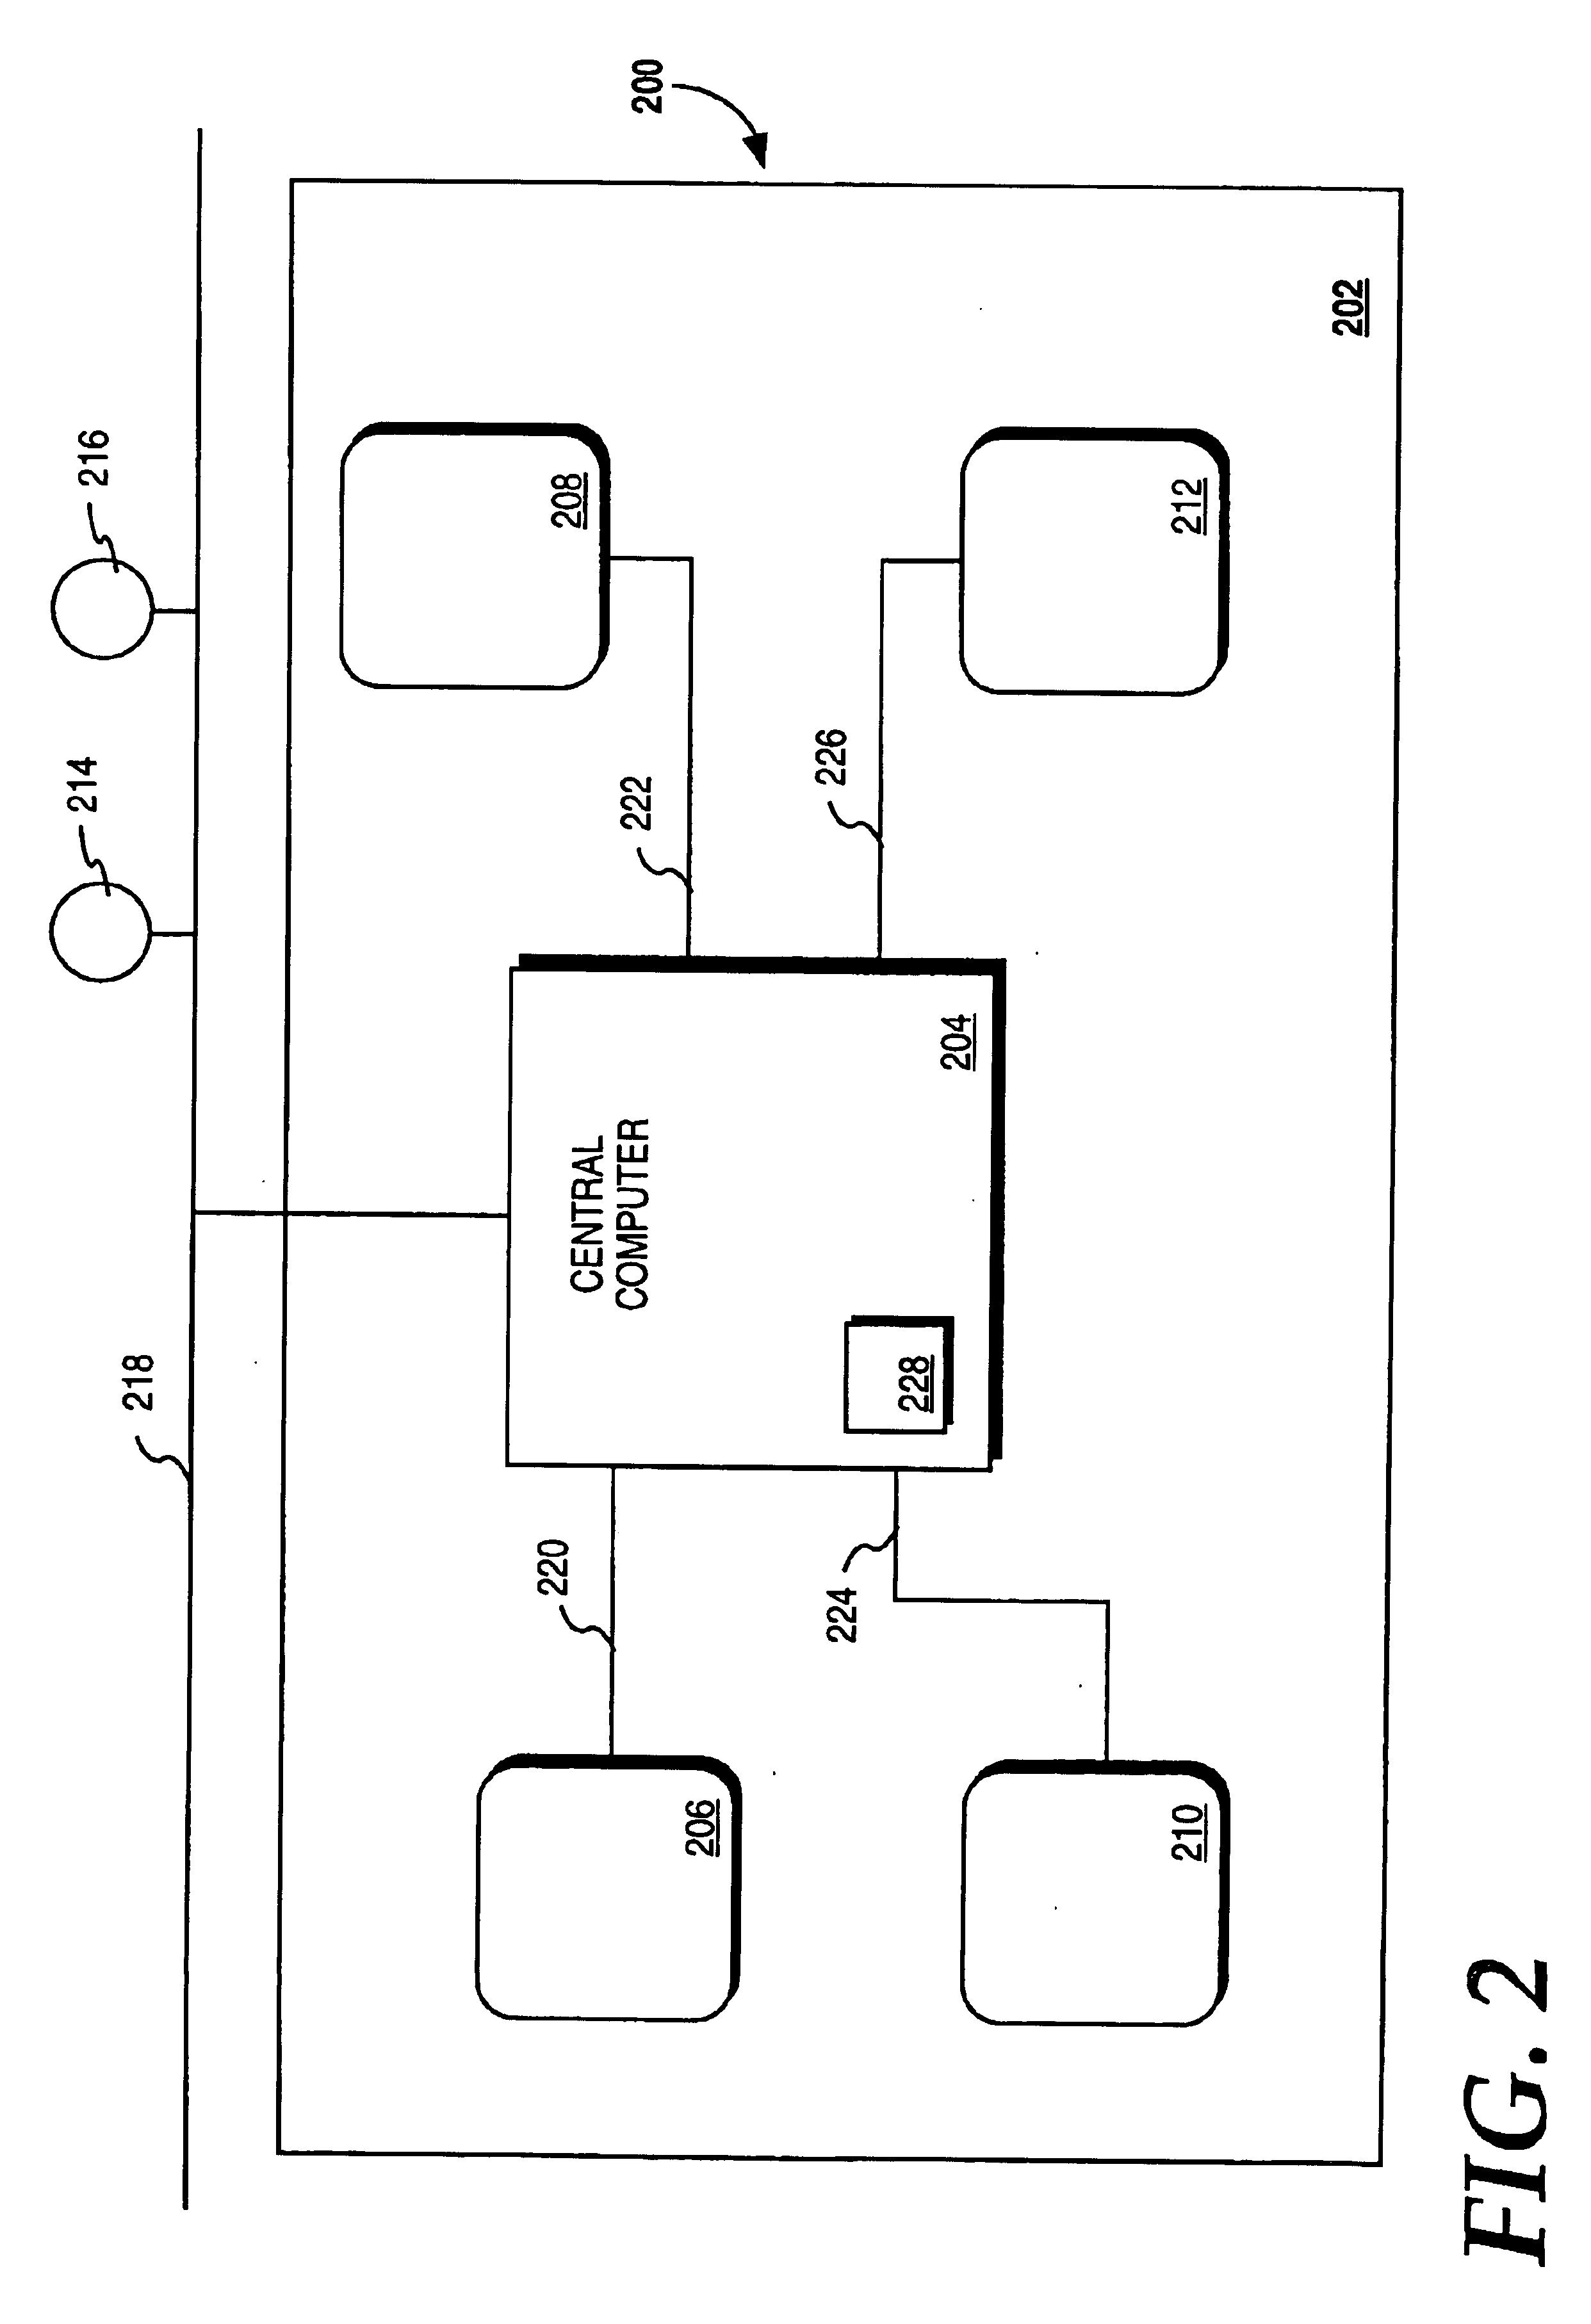 Method for automatic device monitoring by a central computer